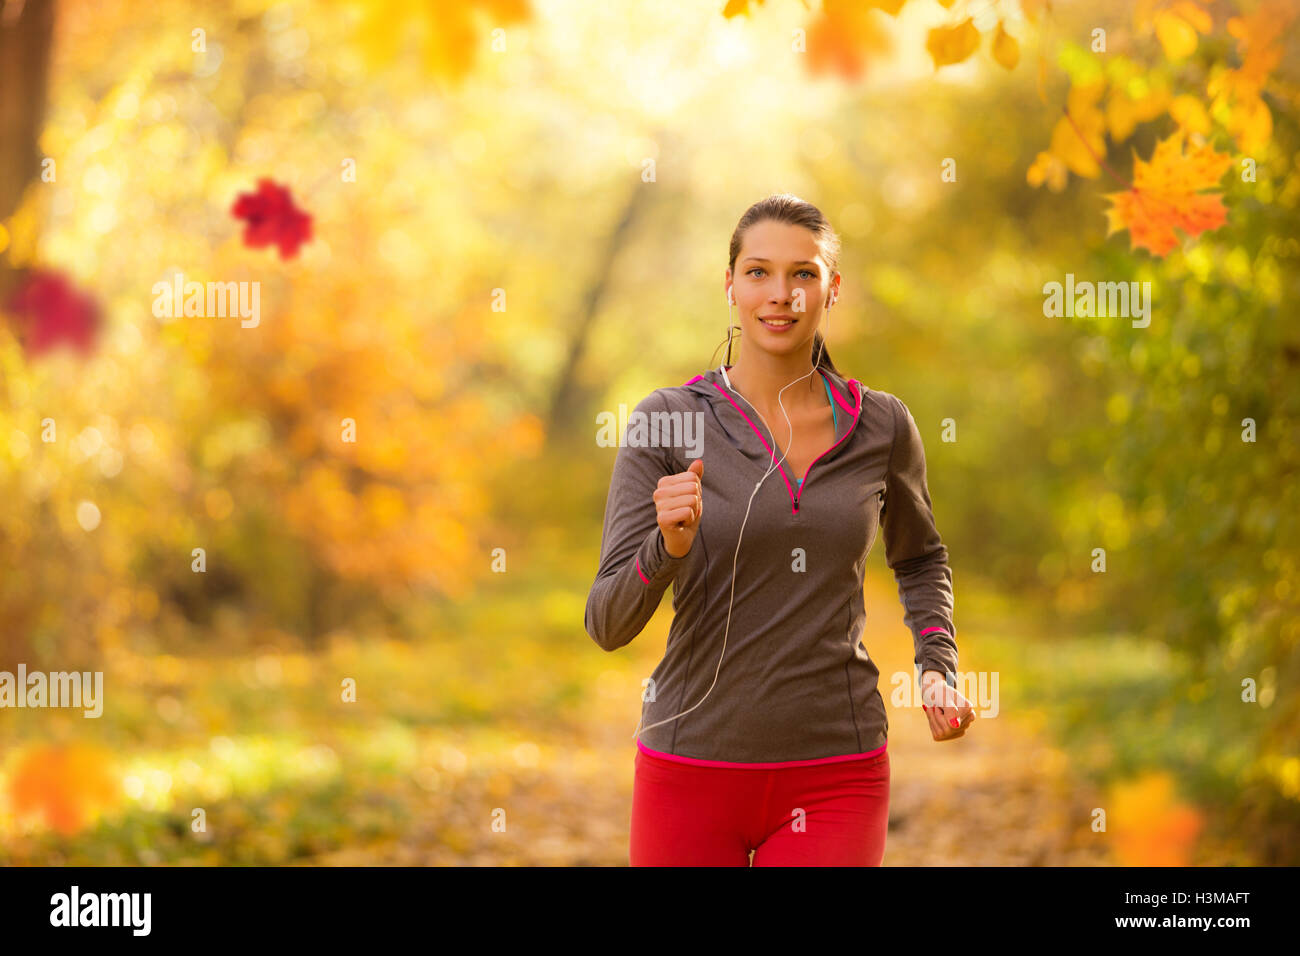 Athlete young woman running in morning sunrise training for marathon and fitness. Healthy active lifestyle in outdoor Stock Photo